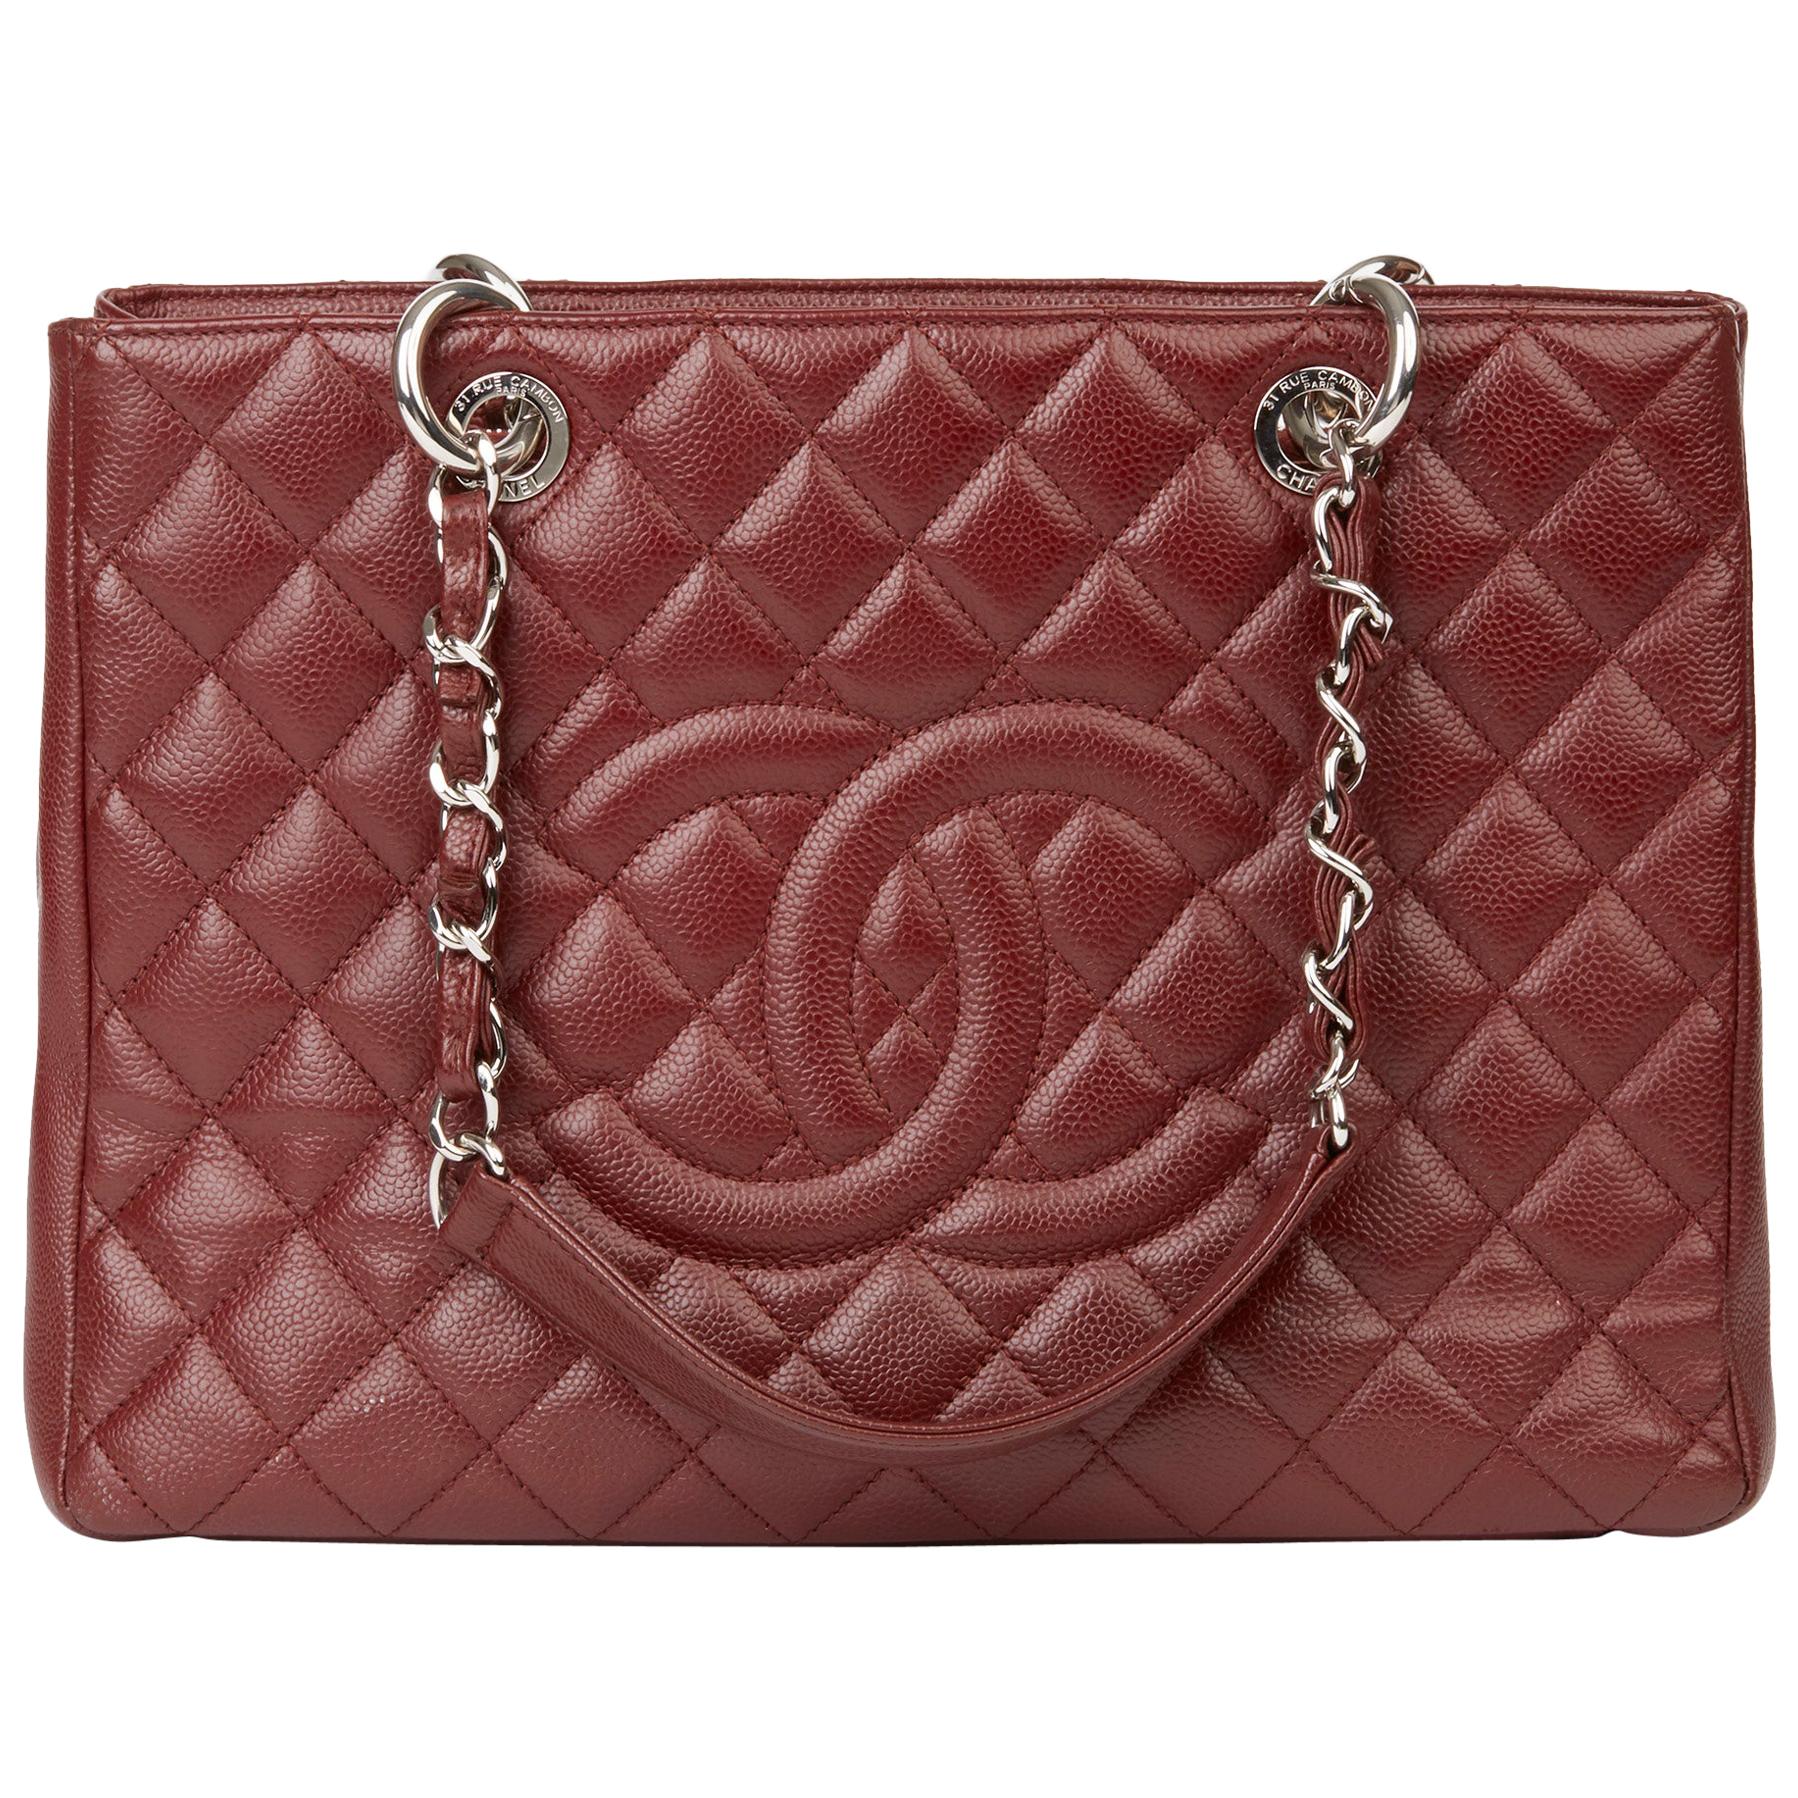 2014 Chanel Burgundy Quilted Caviar Leather Grand Shopping Tote GST